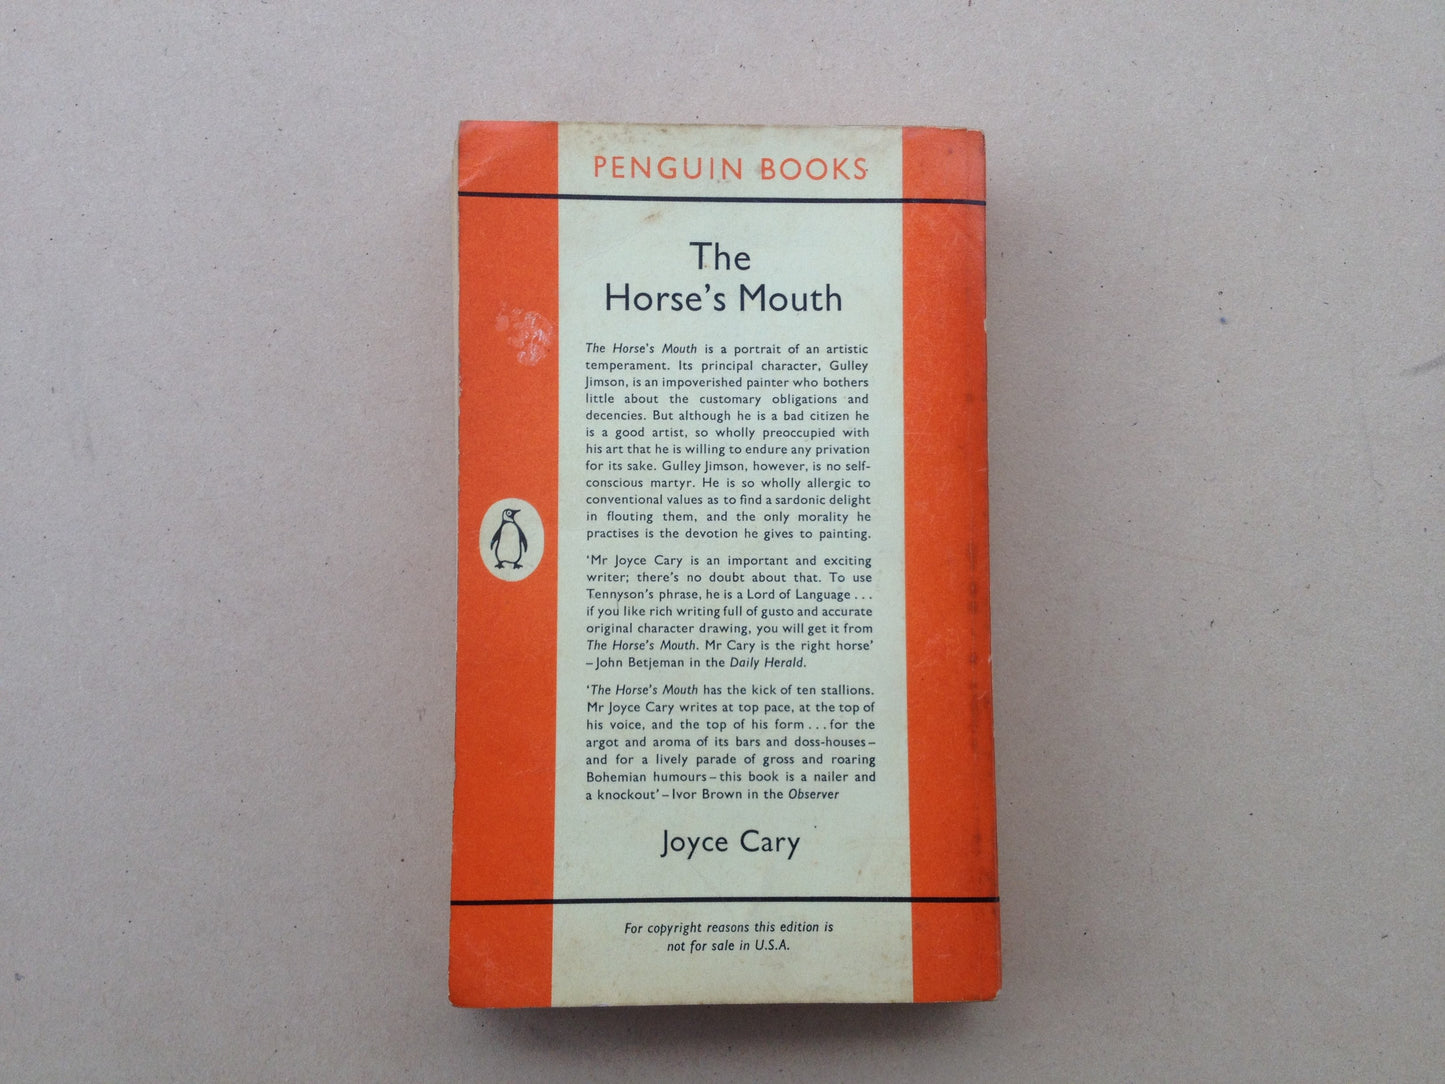 Penguin Series The Horse's Mouth by Joyce Cary - Softcover